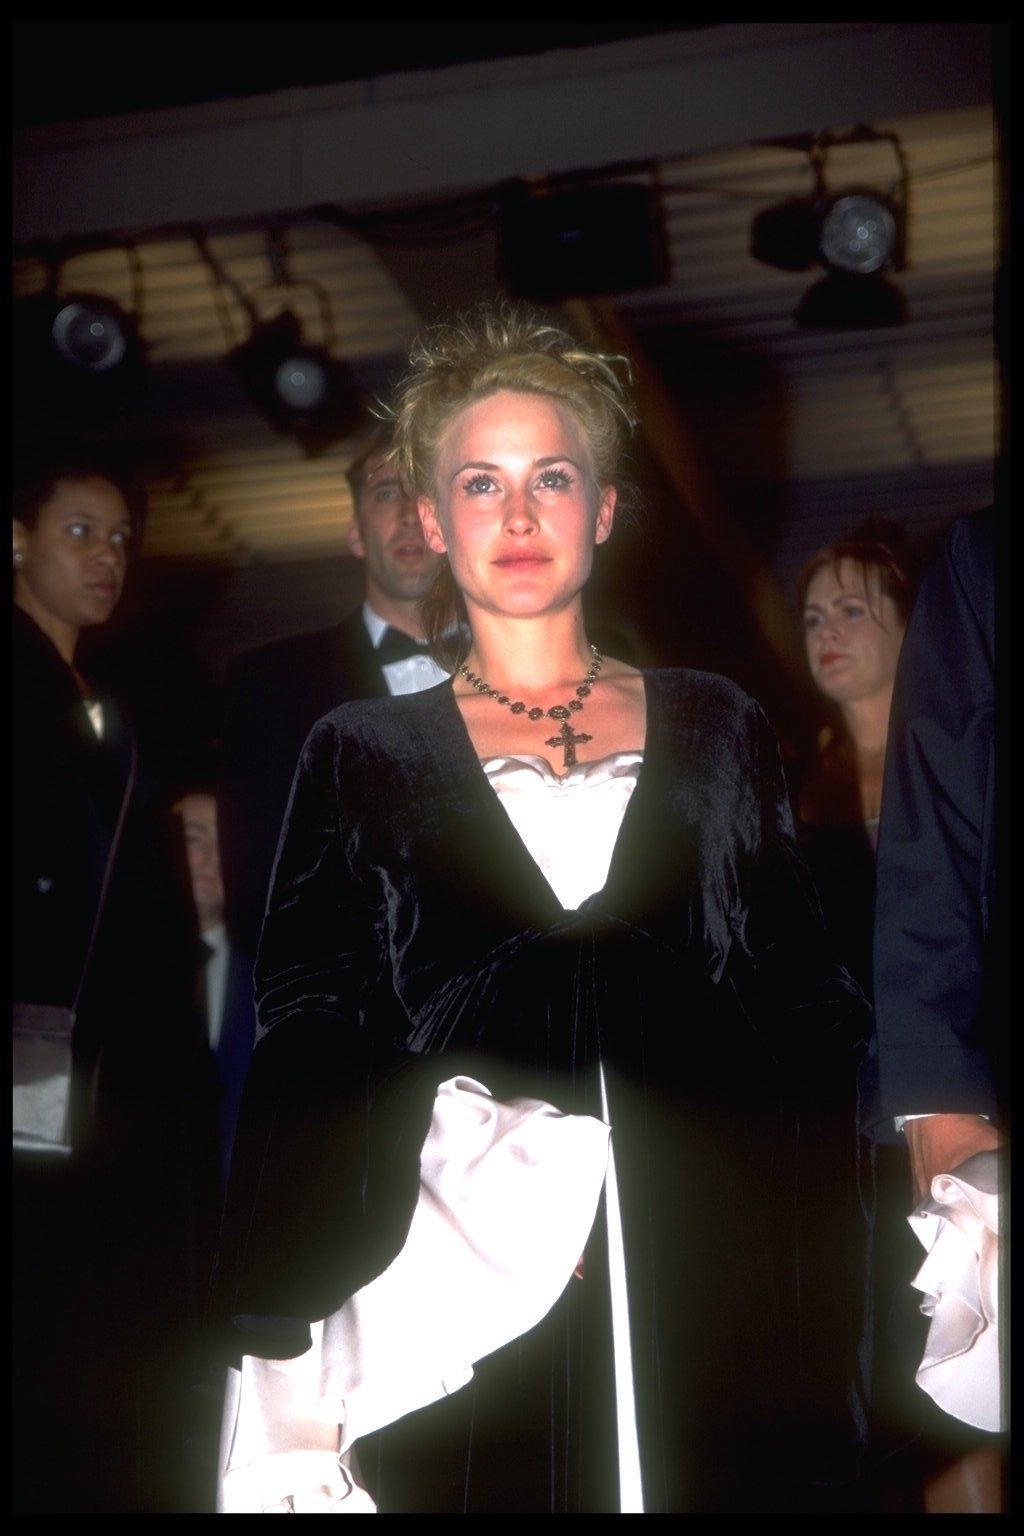 Patricia Arquette at the 48th Cannes Film Festival for the "Beyond Rangoon" premiere in France on May 20, 1995. | Source: Eric Robert/Sygma/Sygma/Getty Images